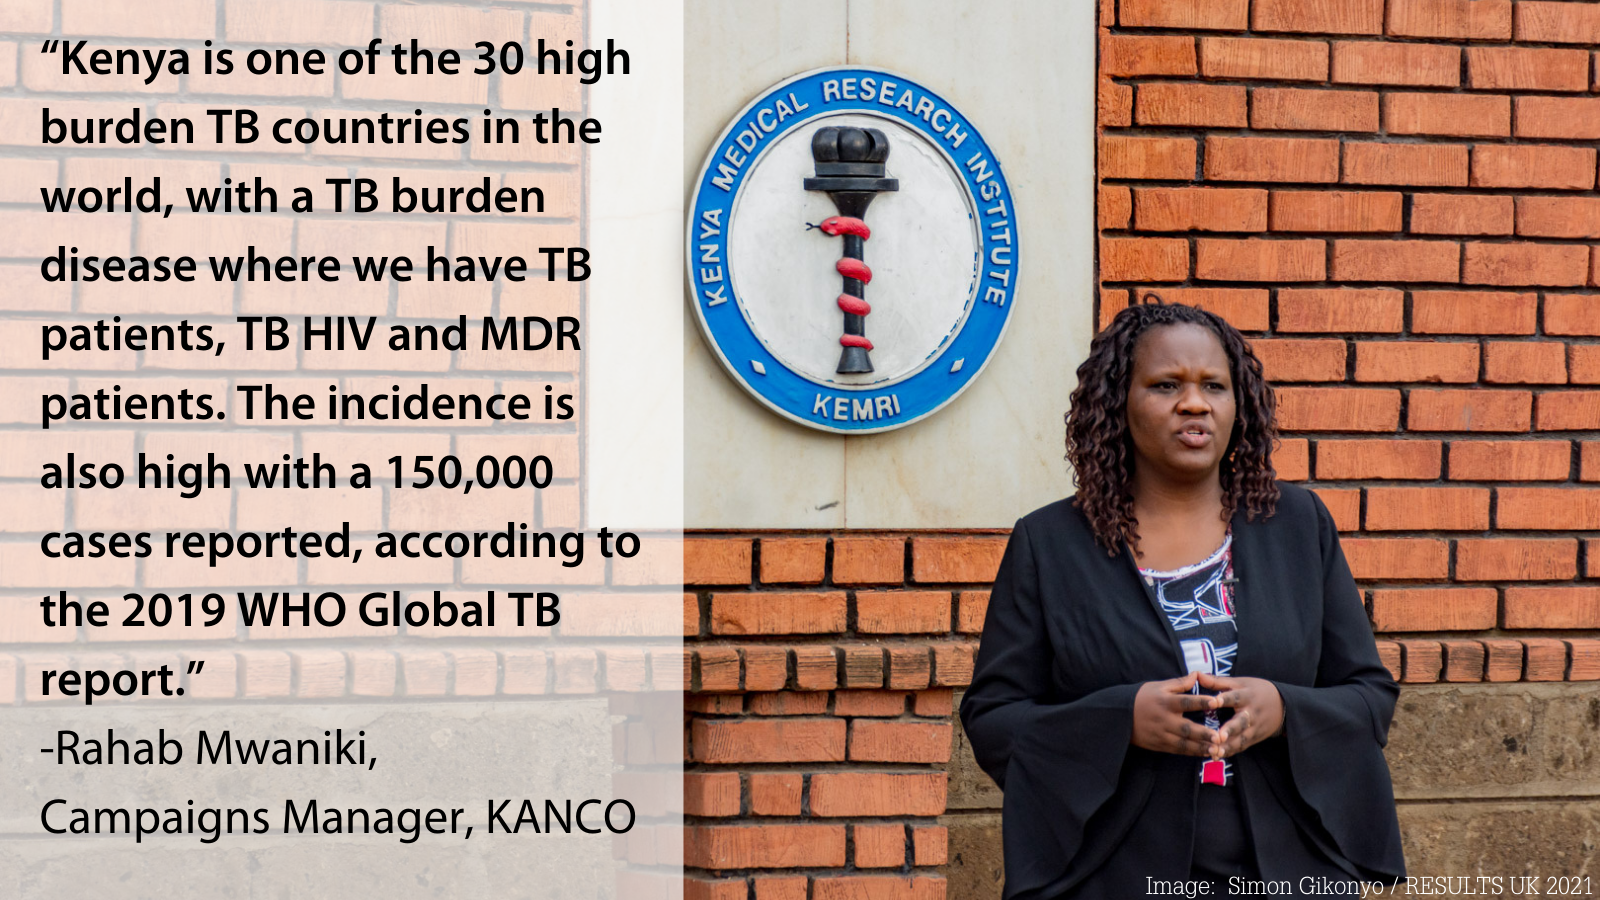 Black woman stands outside Kenya Medical research institute. Quote: “Kenya is one of the 30 high burden TB countries in the world, with a TB burden disease where we have TB patients, TB HIV and MDR patients. The incidence is also high with a 150,000 cases reported, according to the 2019 WHO Global TB report.” -Rahab Mwaniki, Campaigns Manager, KANCO